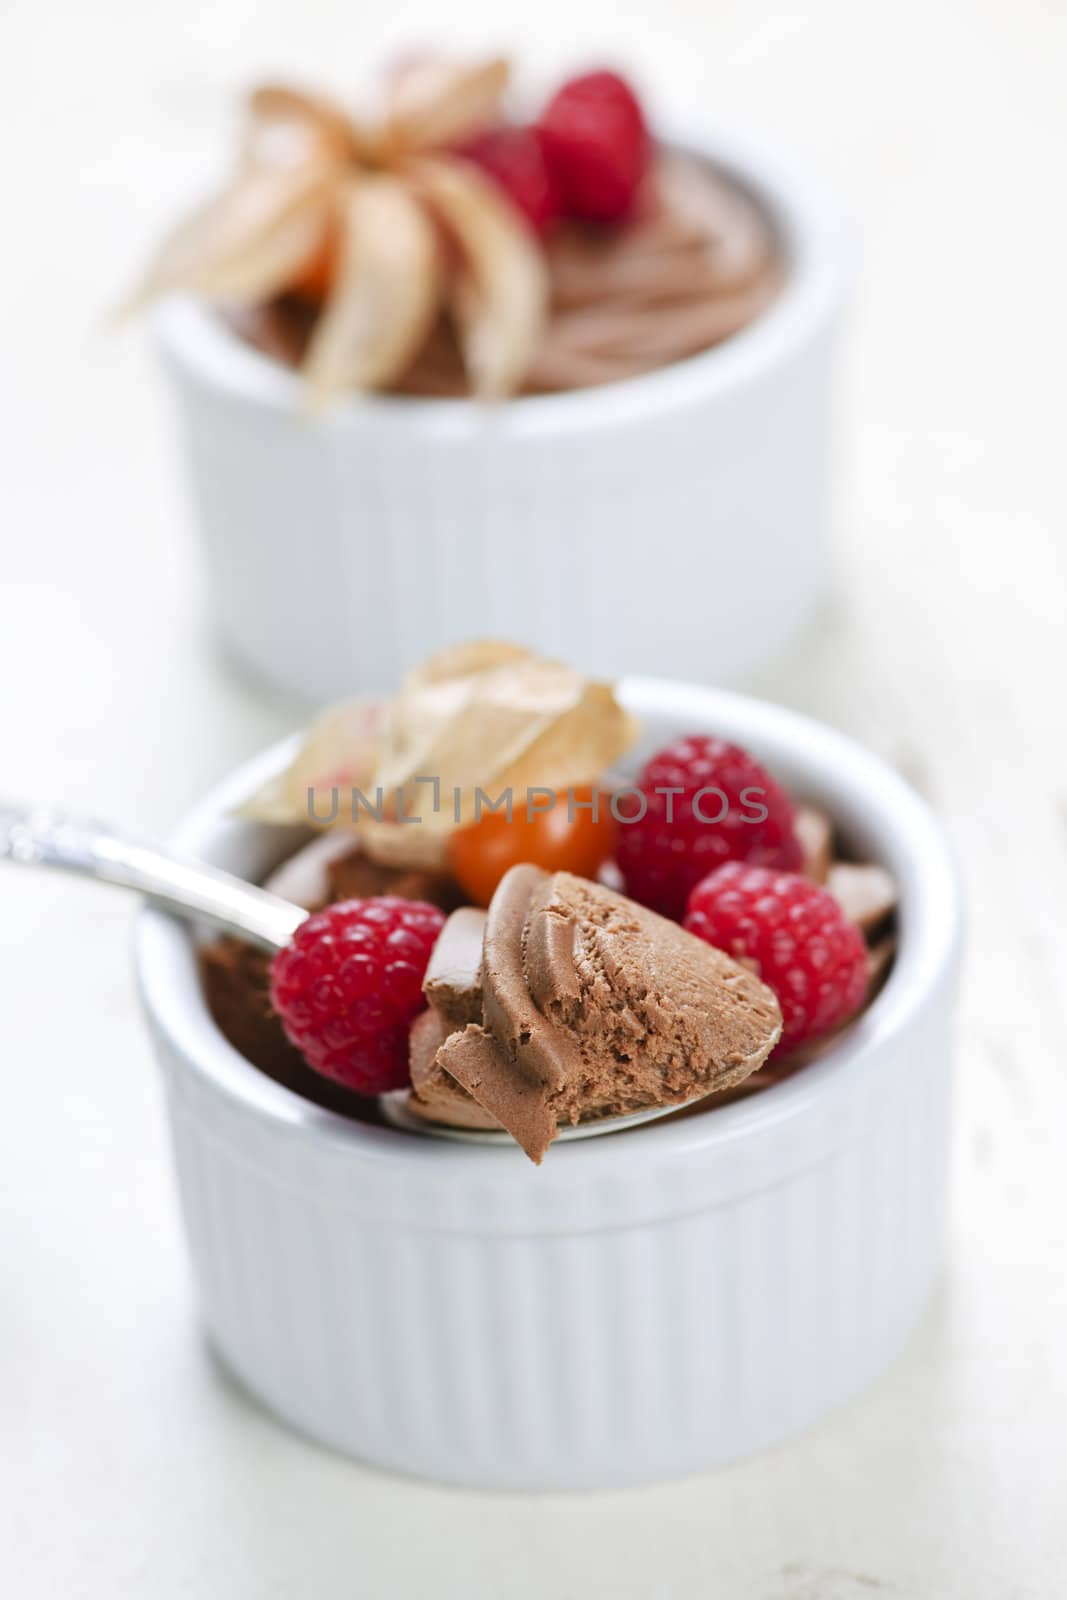 Chocolate mousse dessert by elenathewise